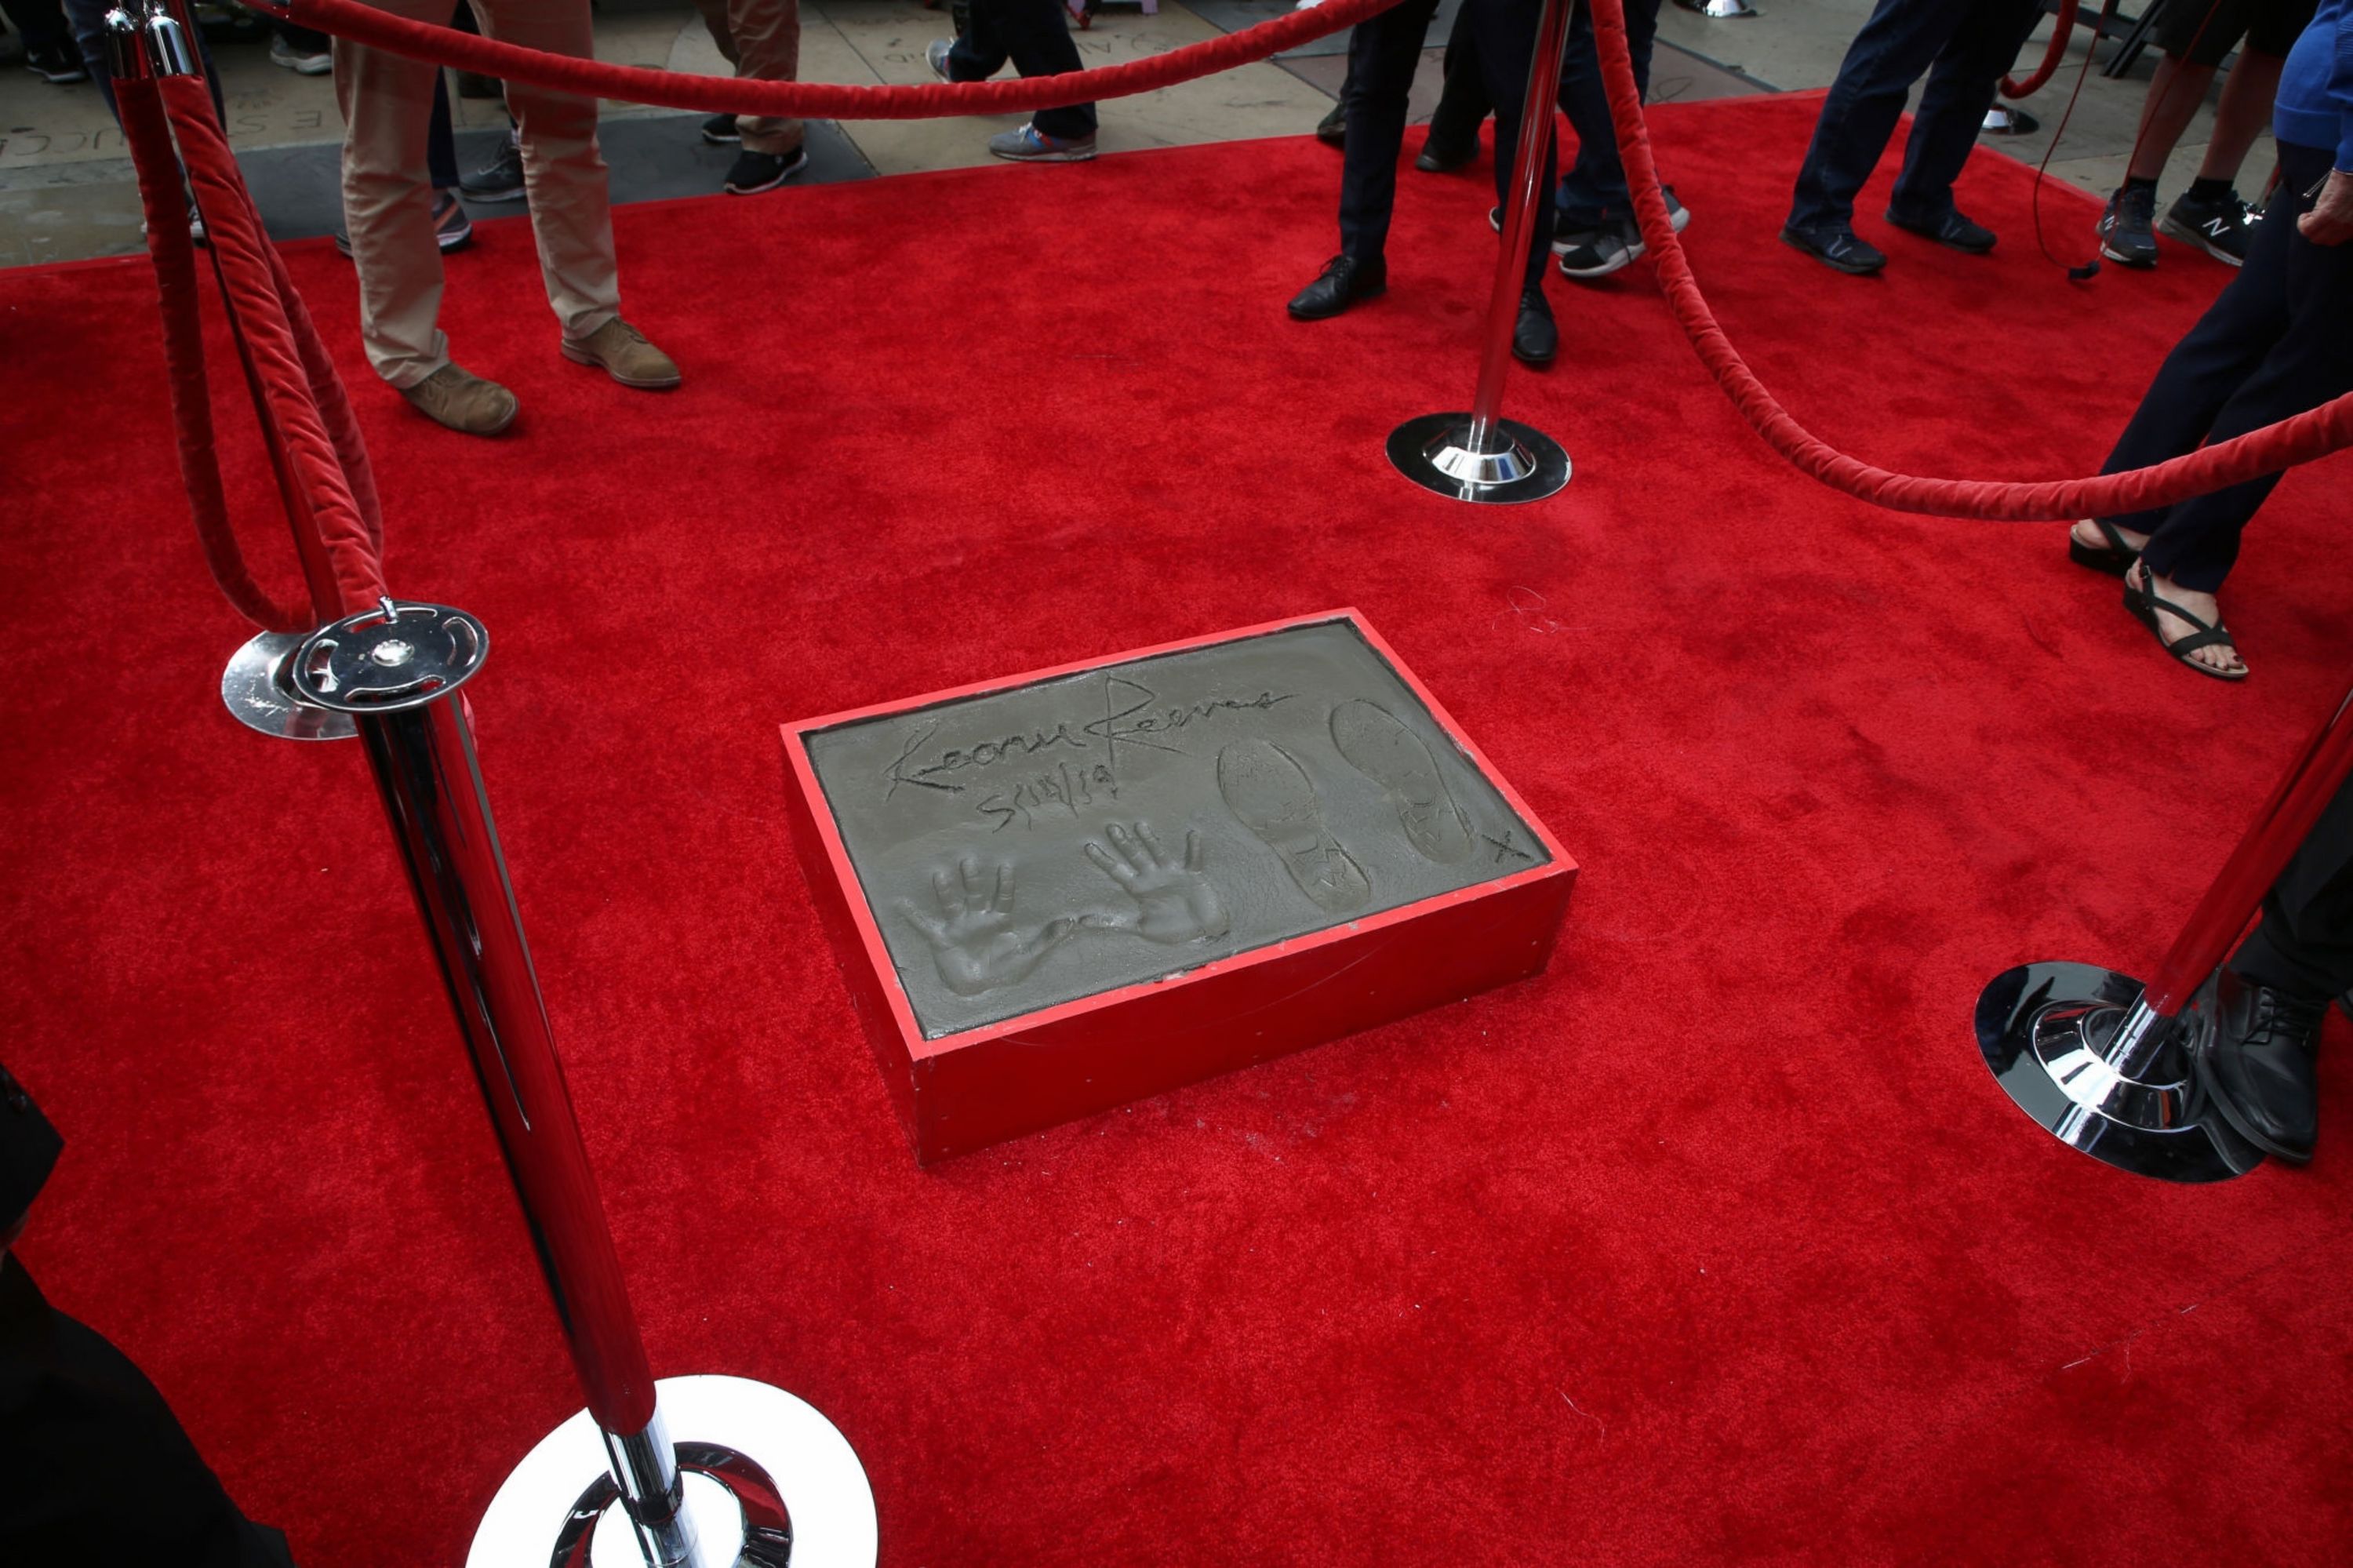 2019-05-14-Hand-and-Foot-Print-Ceremony-At-The-Chinese-Theater-078.jpg